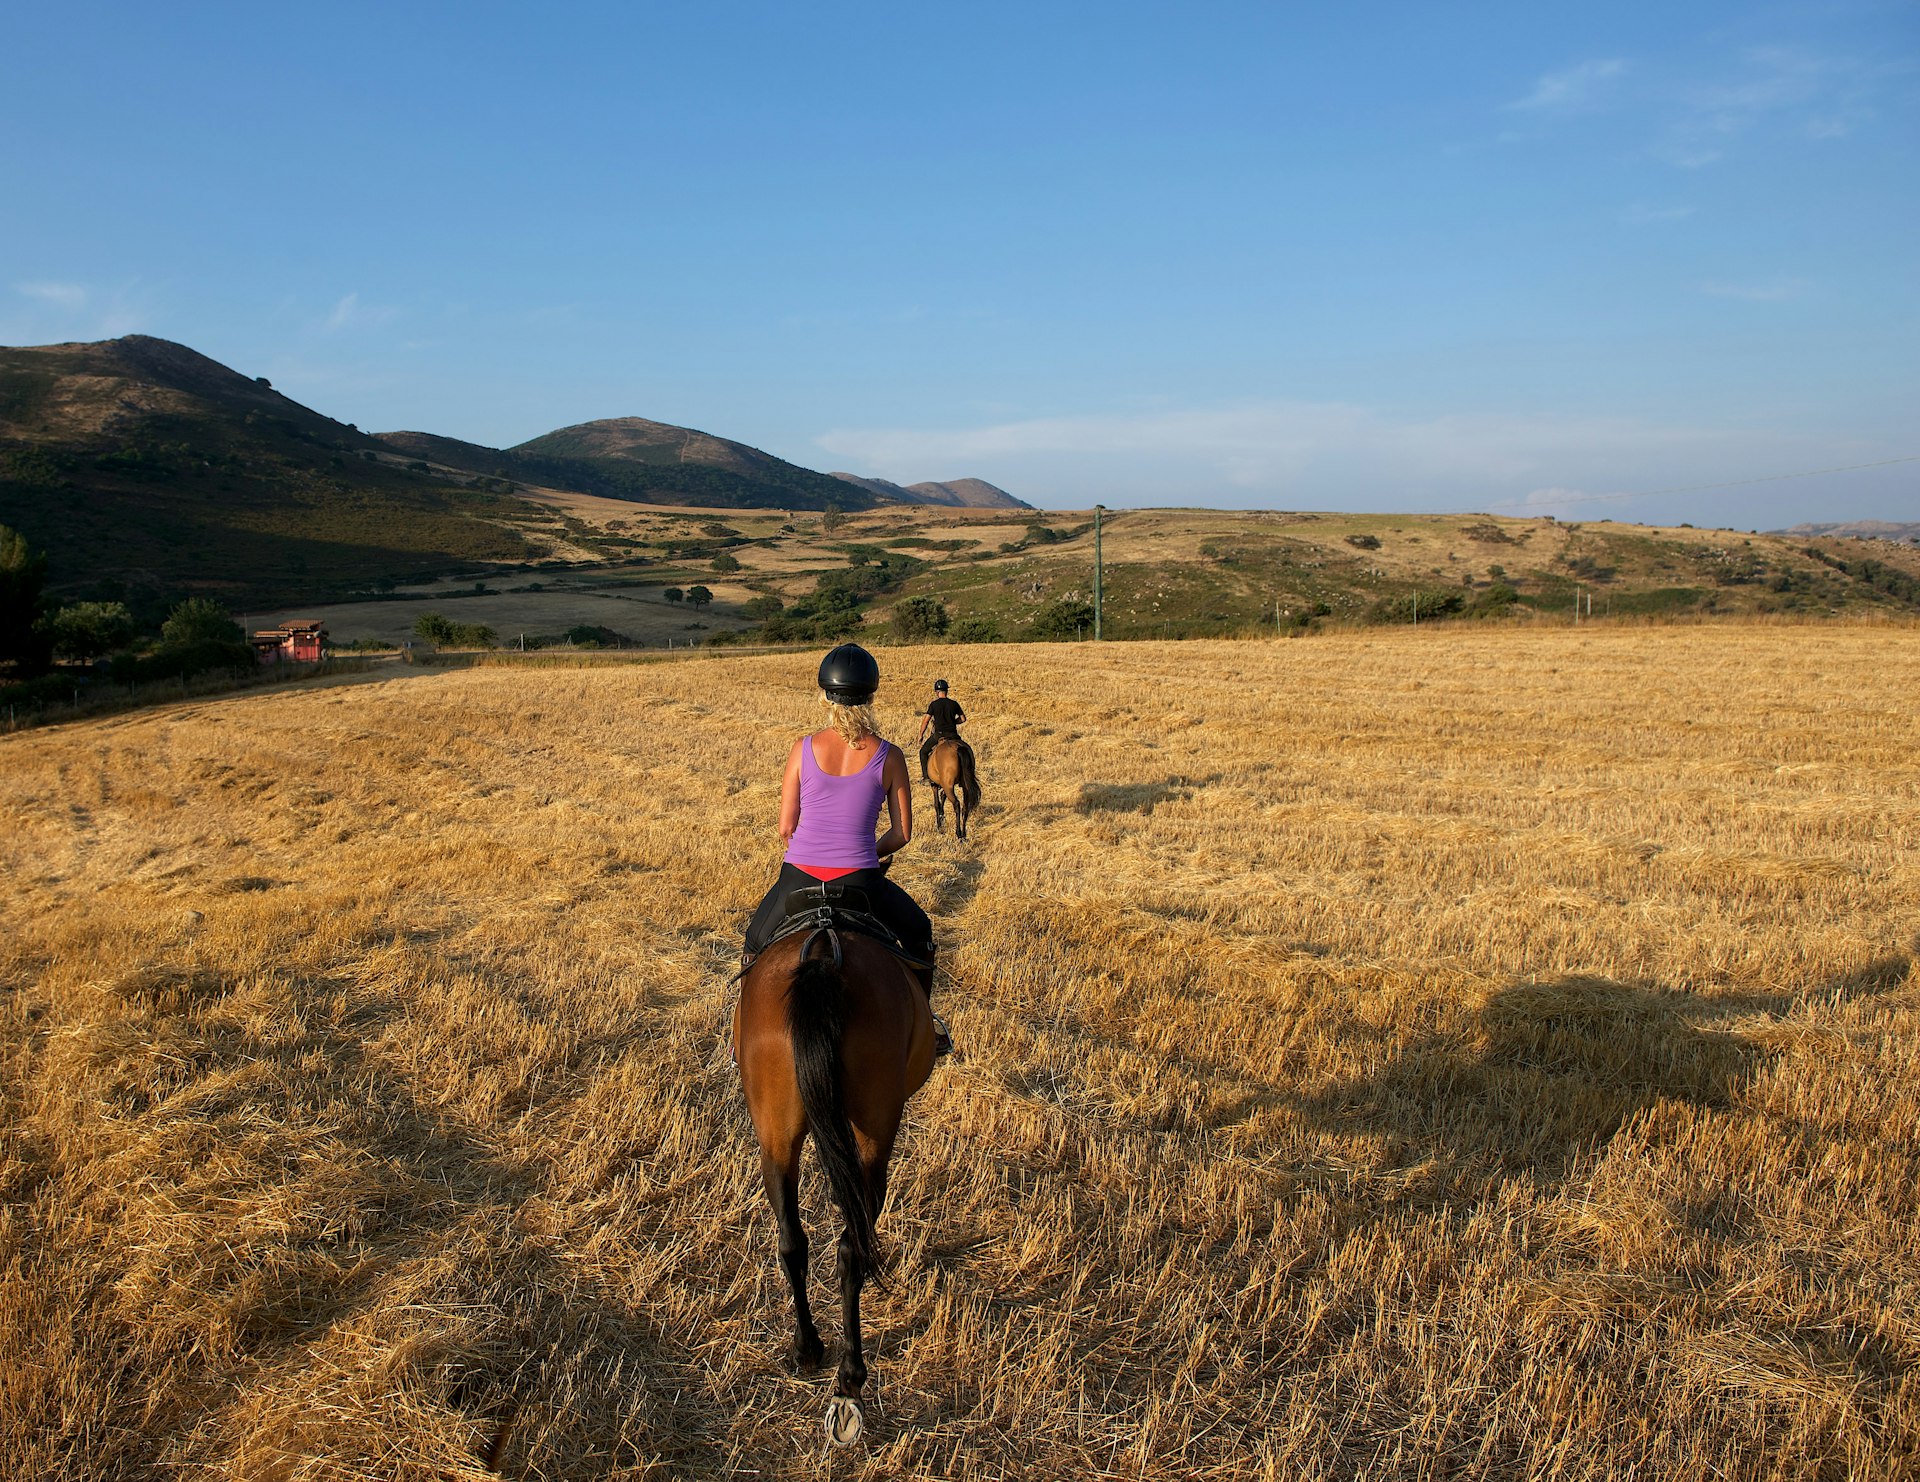 Young woman and a man riding horses in the Sardinian countryside during sunset.